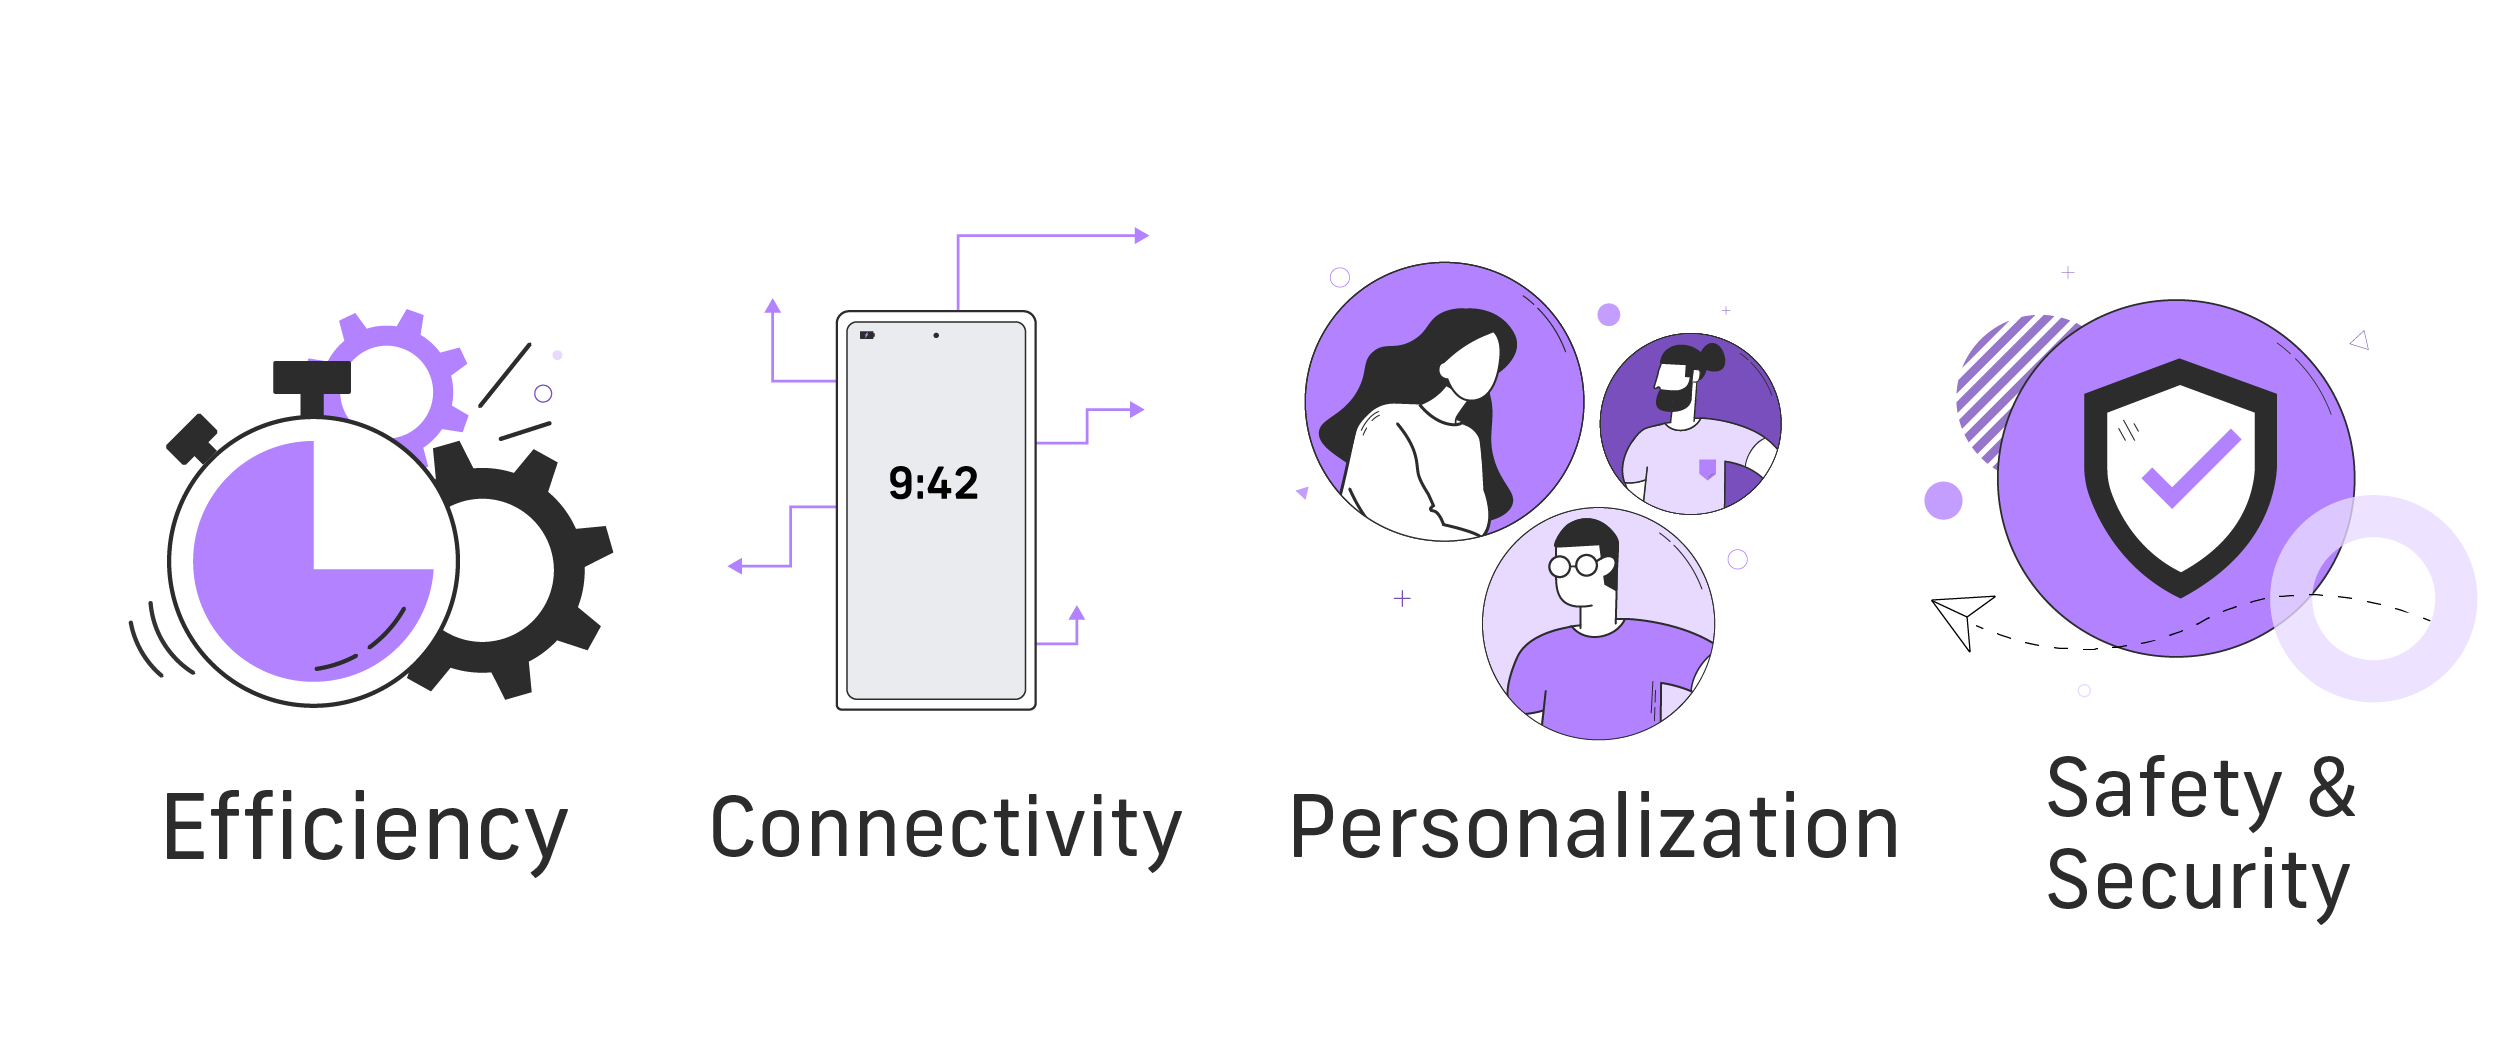 Smart Technology icons for efficiency, connectivity, personalization, safety & security